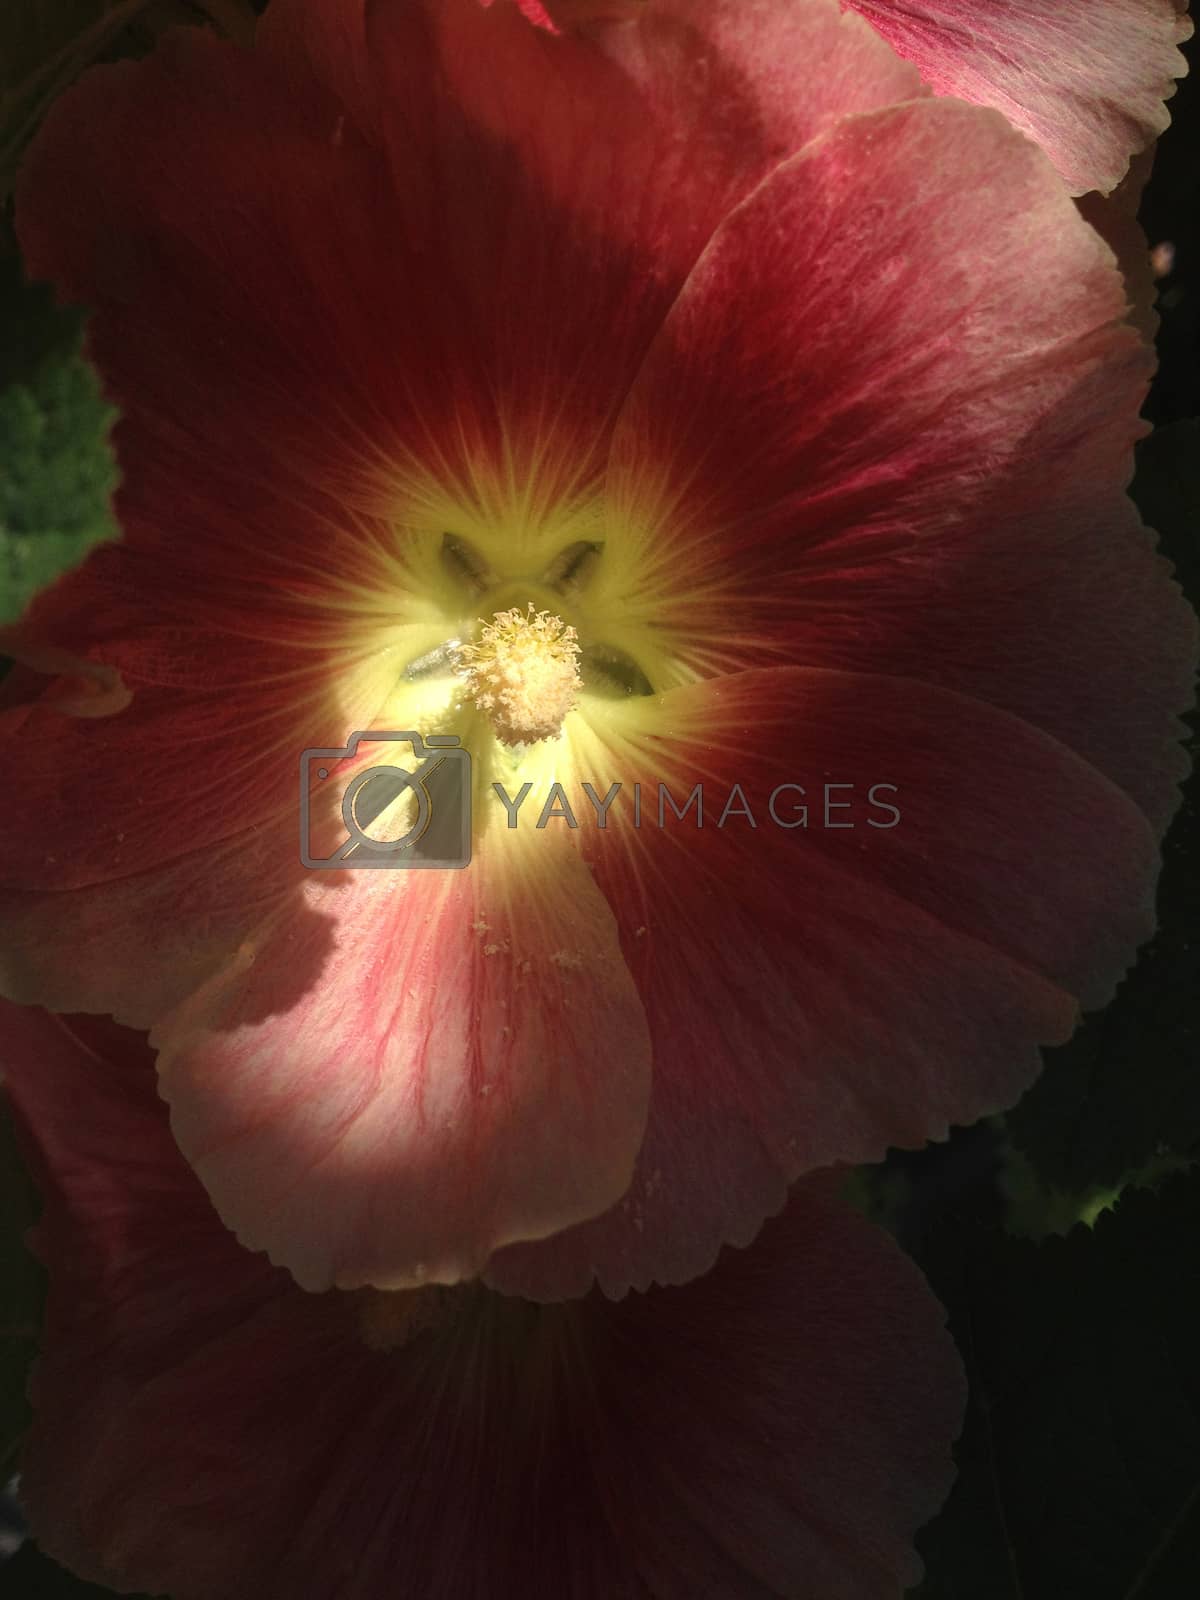 Royalty free image of Red Hollyhock Flowers by mmm